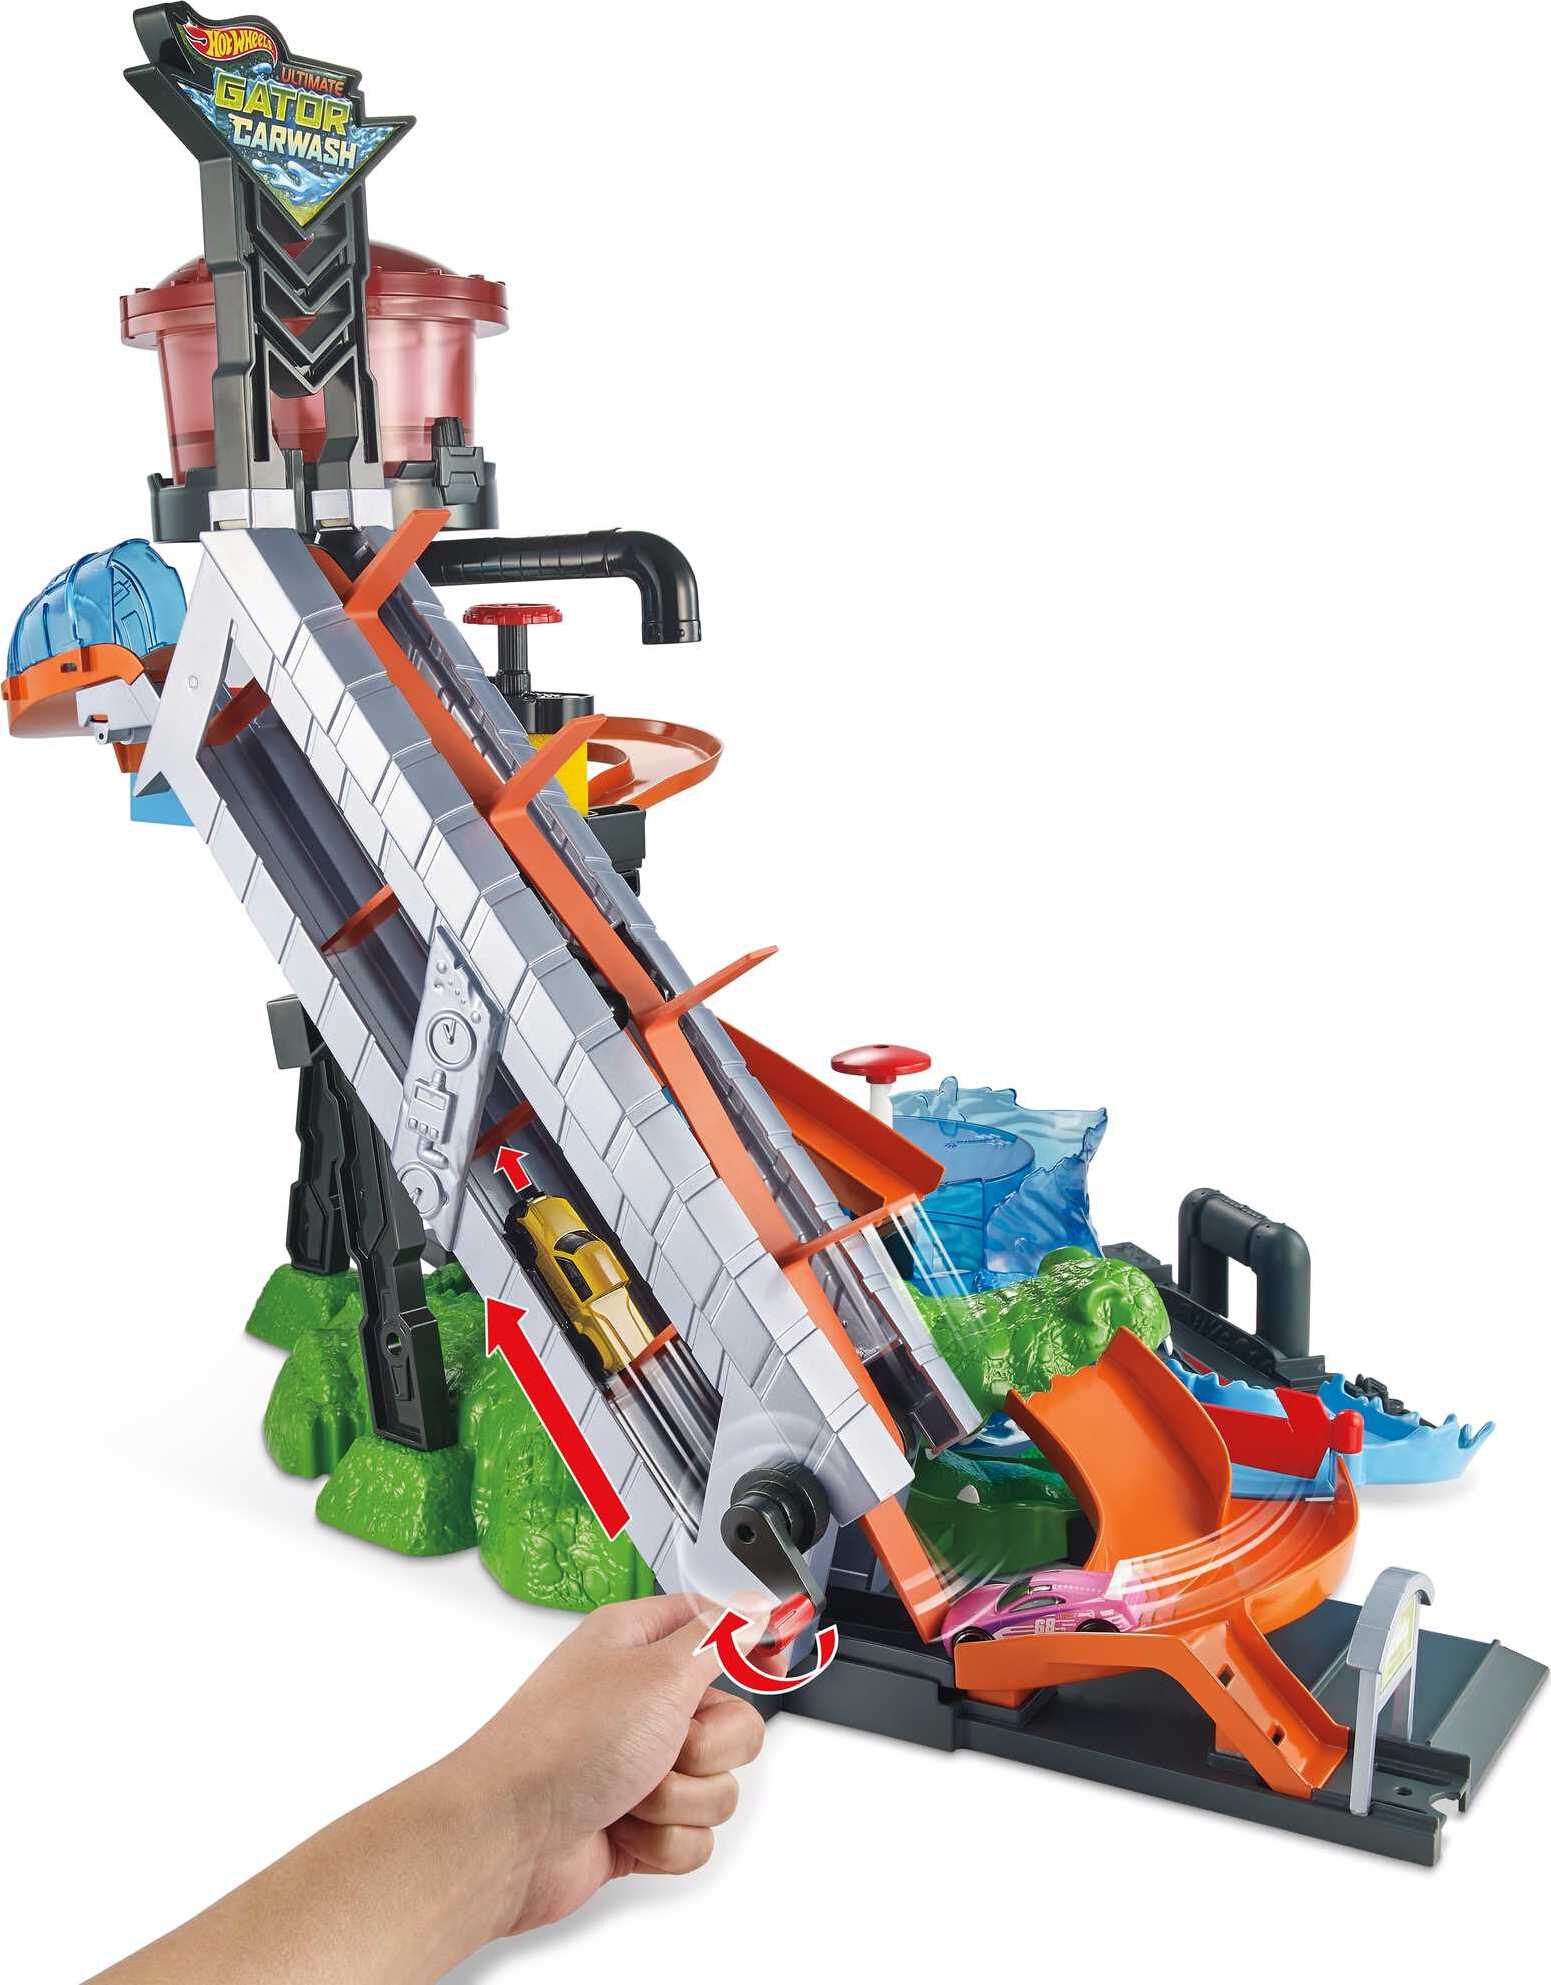 Hot Wheels Ultimate Gator Car Wash Playset with Color Shifters Toy Car in 1:64 Scale - image 5 of 7